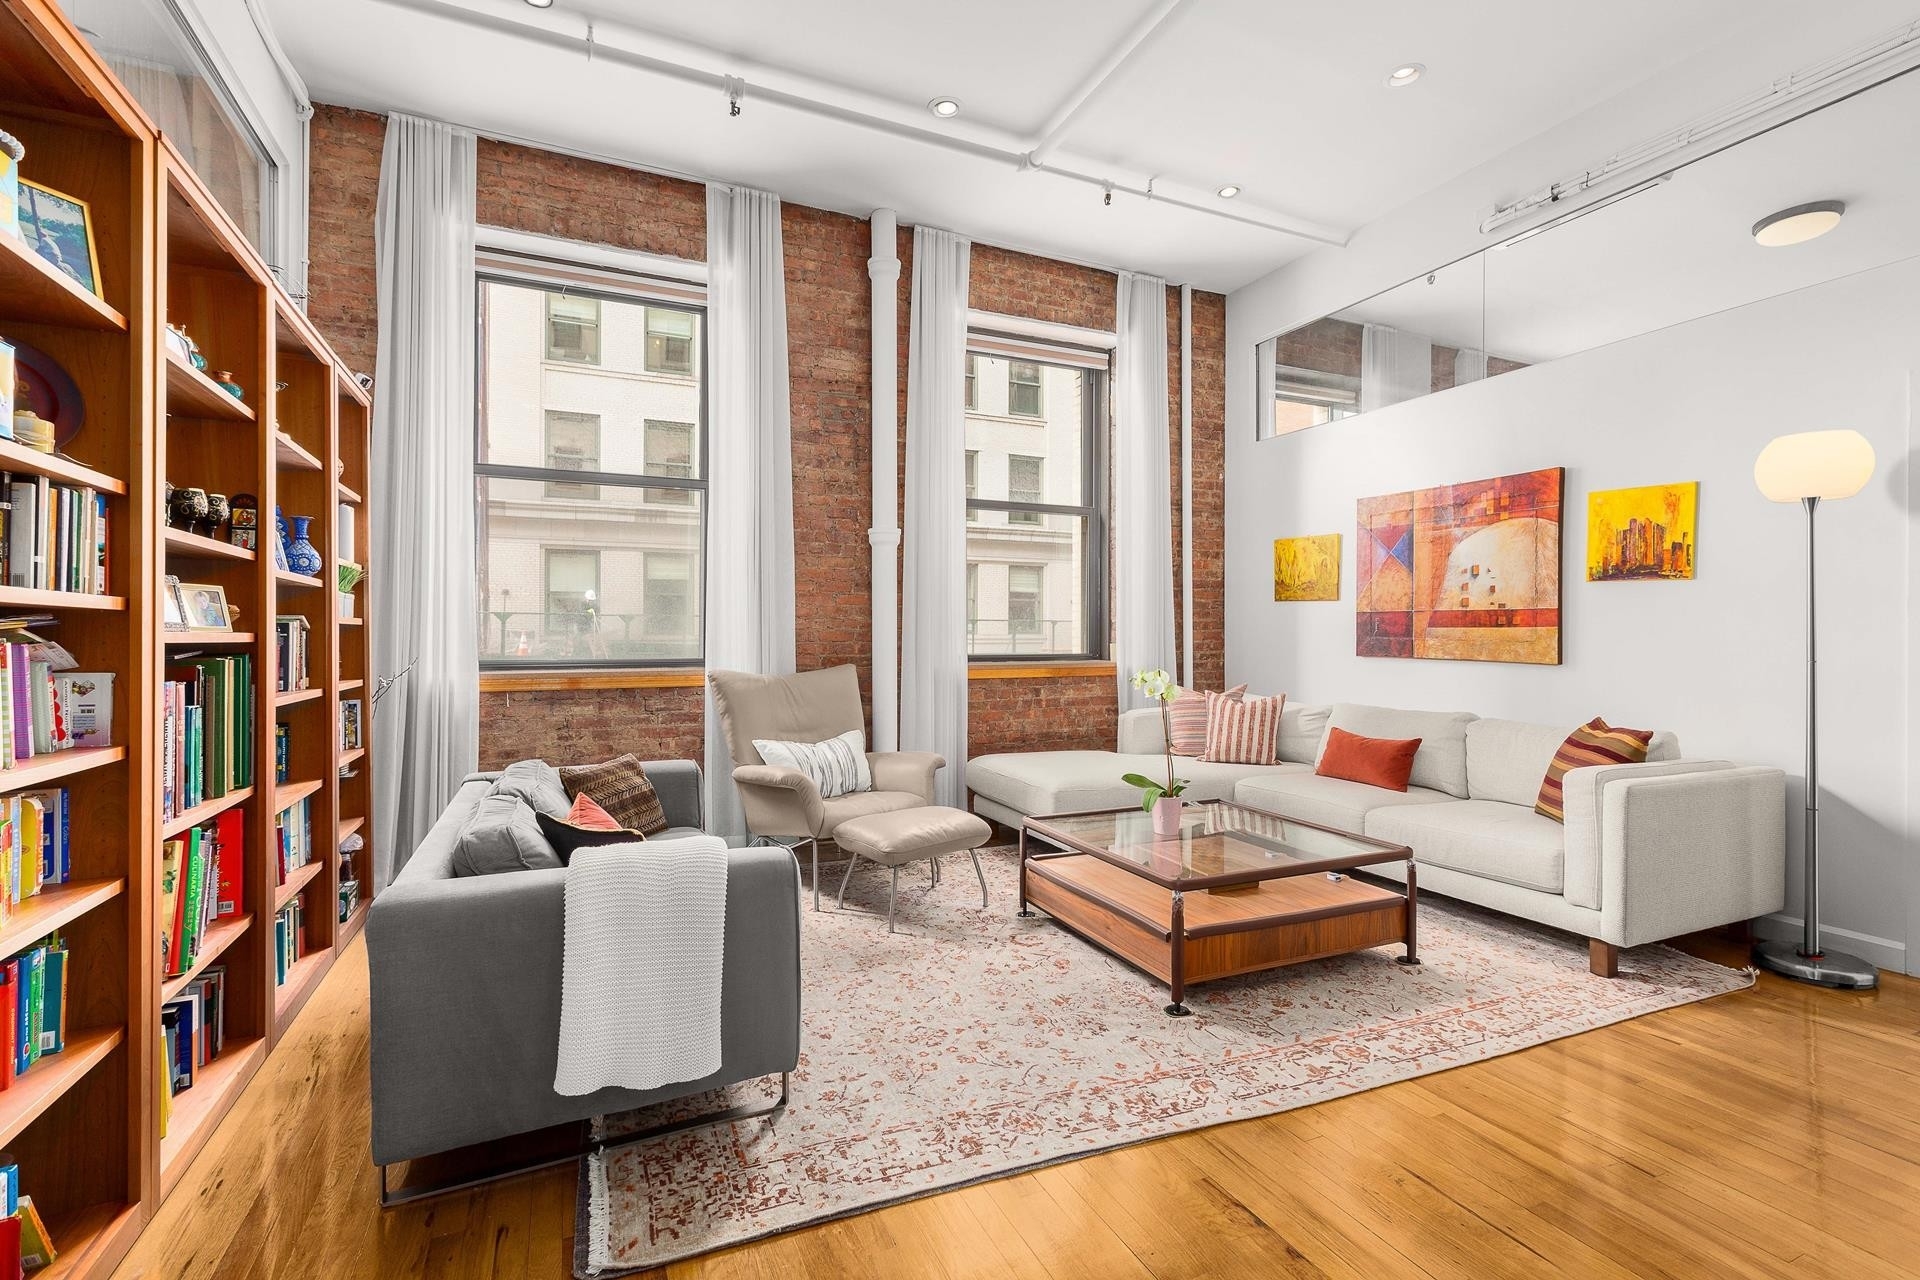 Co-op Properties for Sale at SILK AND SPICE, 165 HUDSON ST, 2B TriBeCa, New York, NY 10013